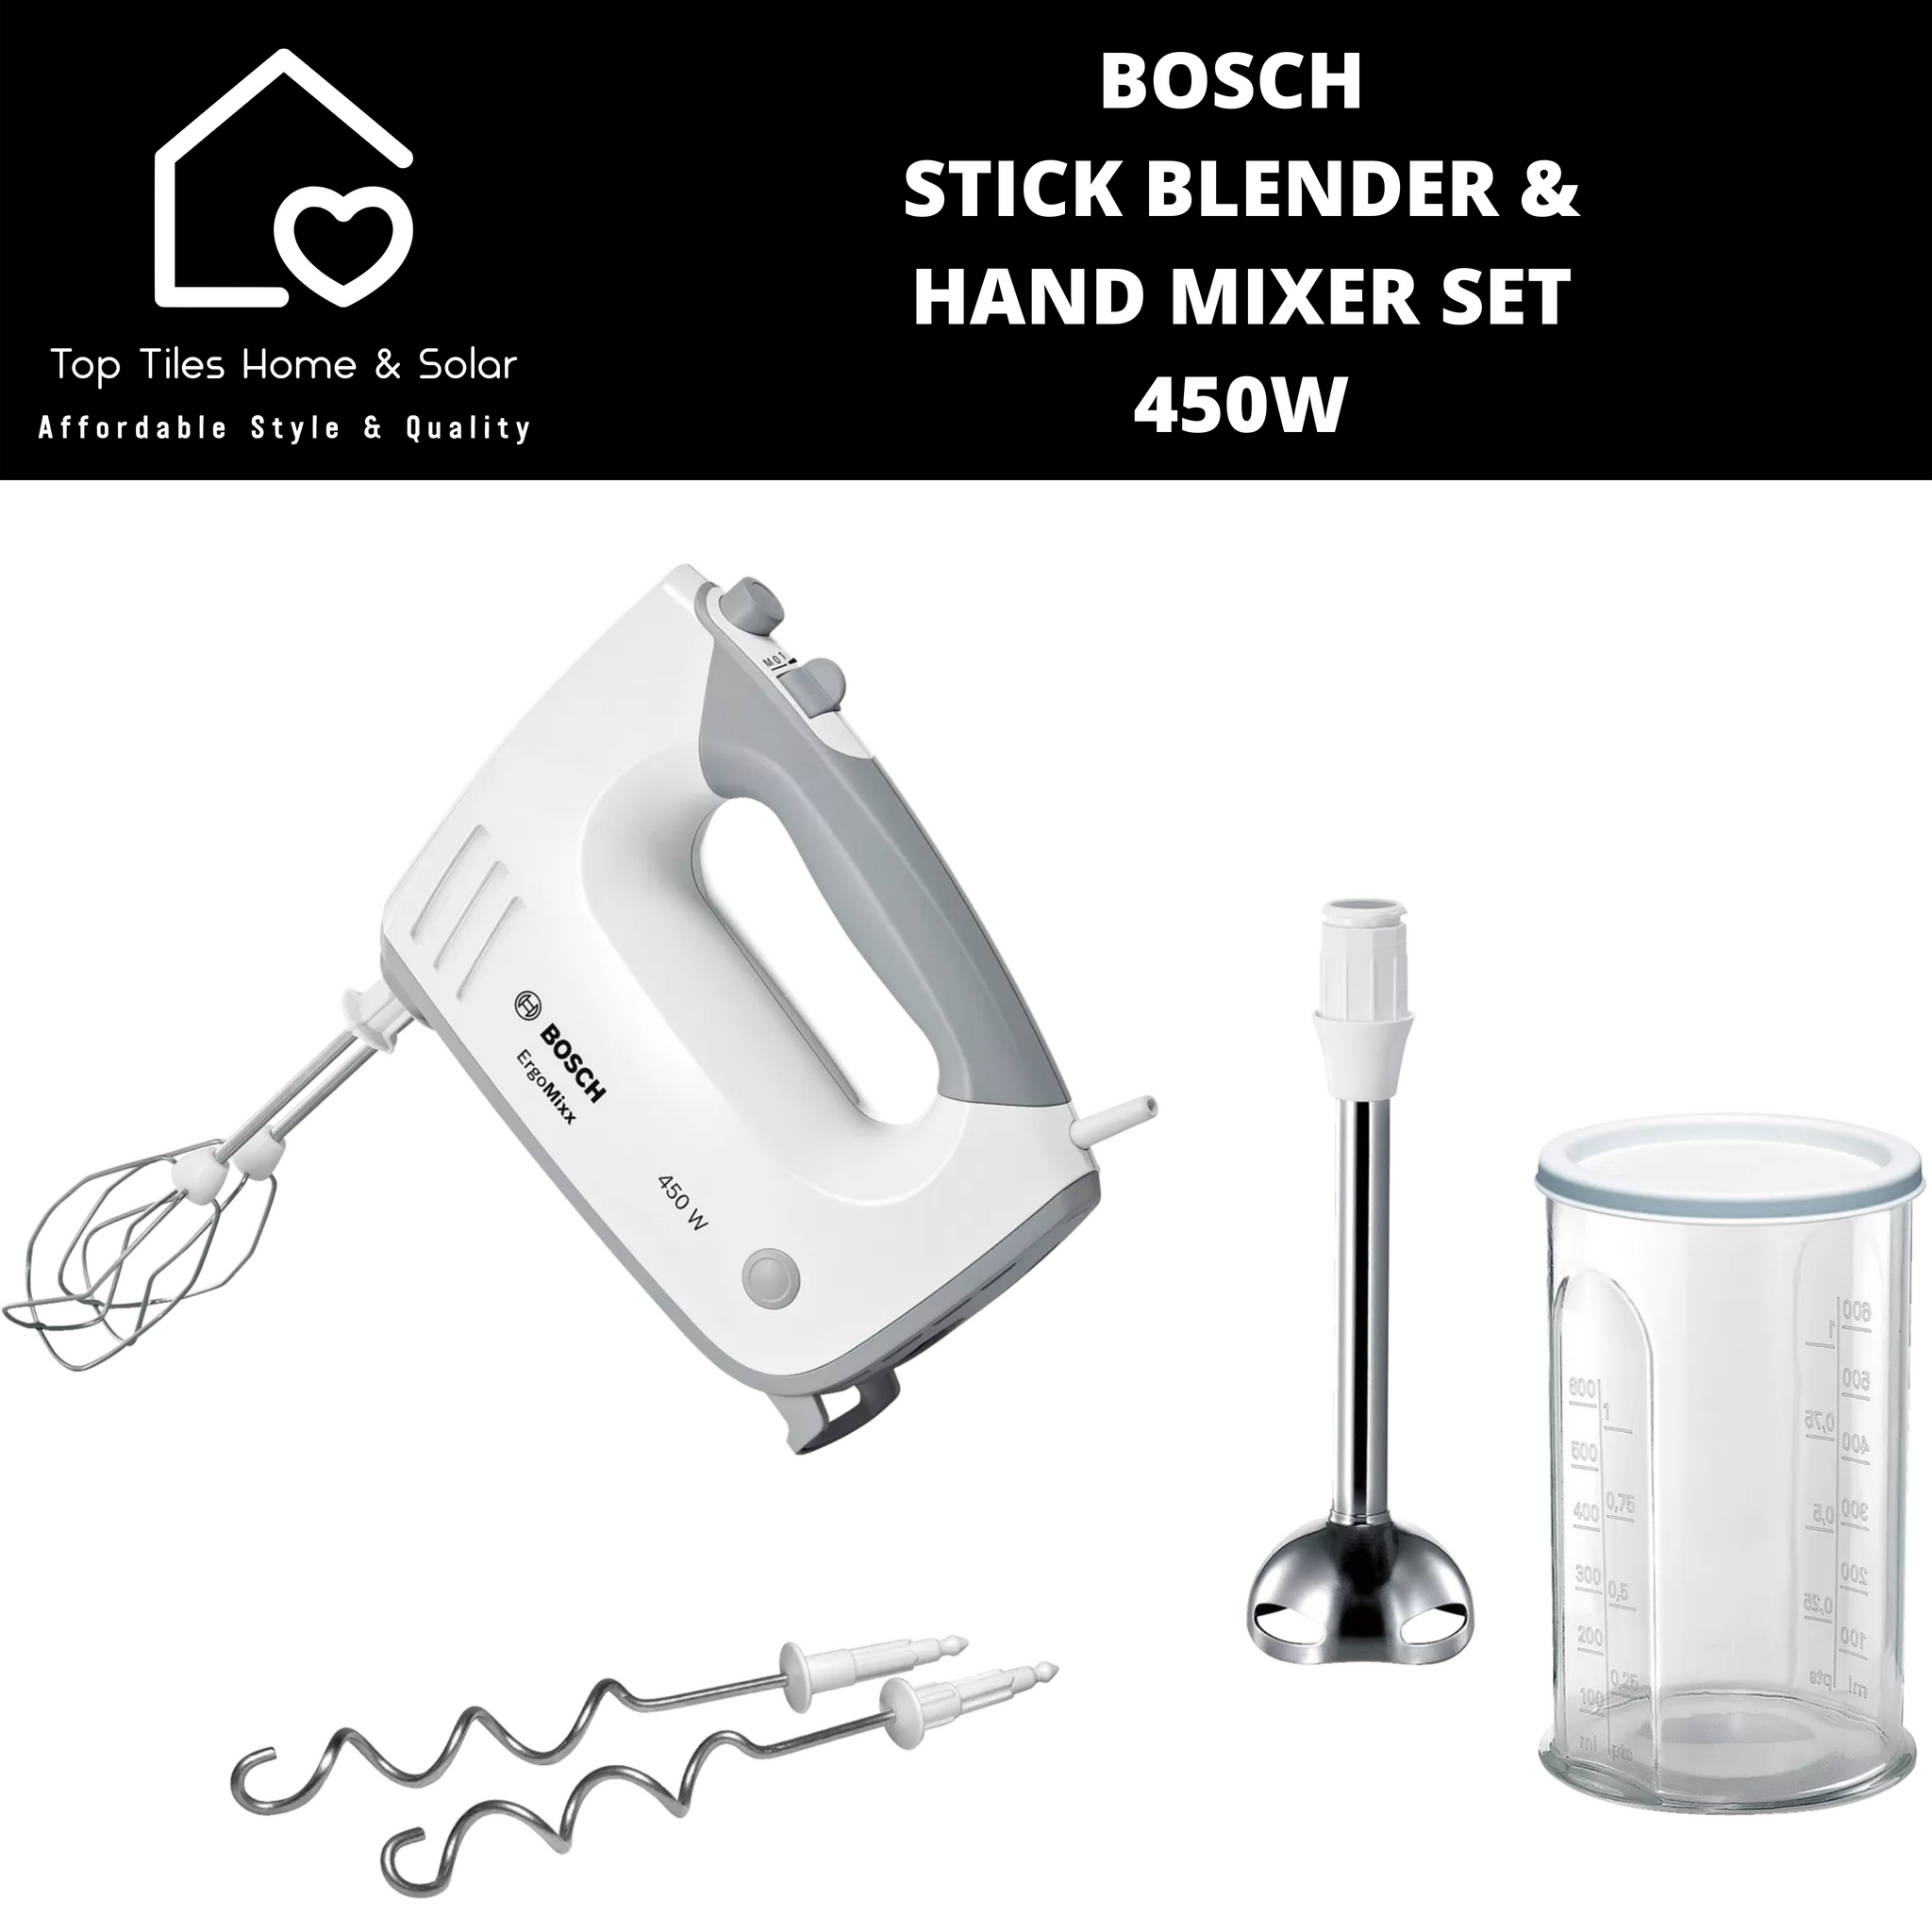 Spare part for Bosch hand mixer mixing rod kit 12009769